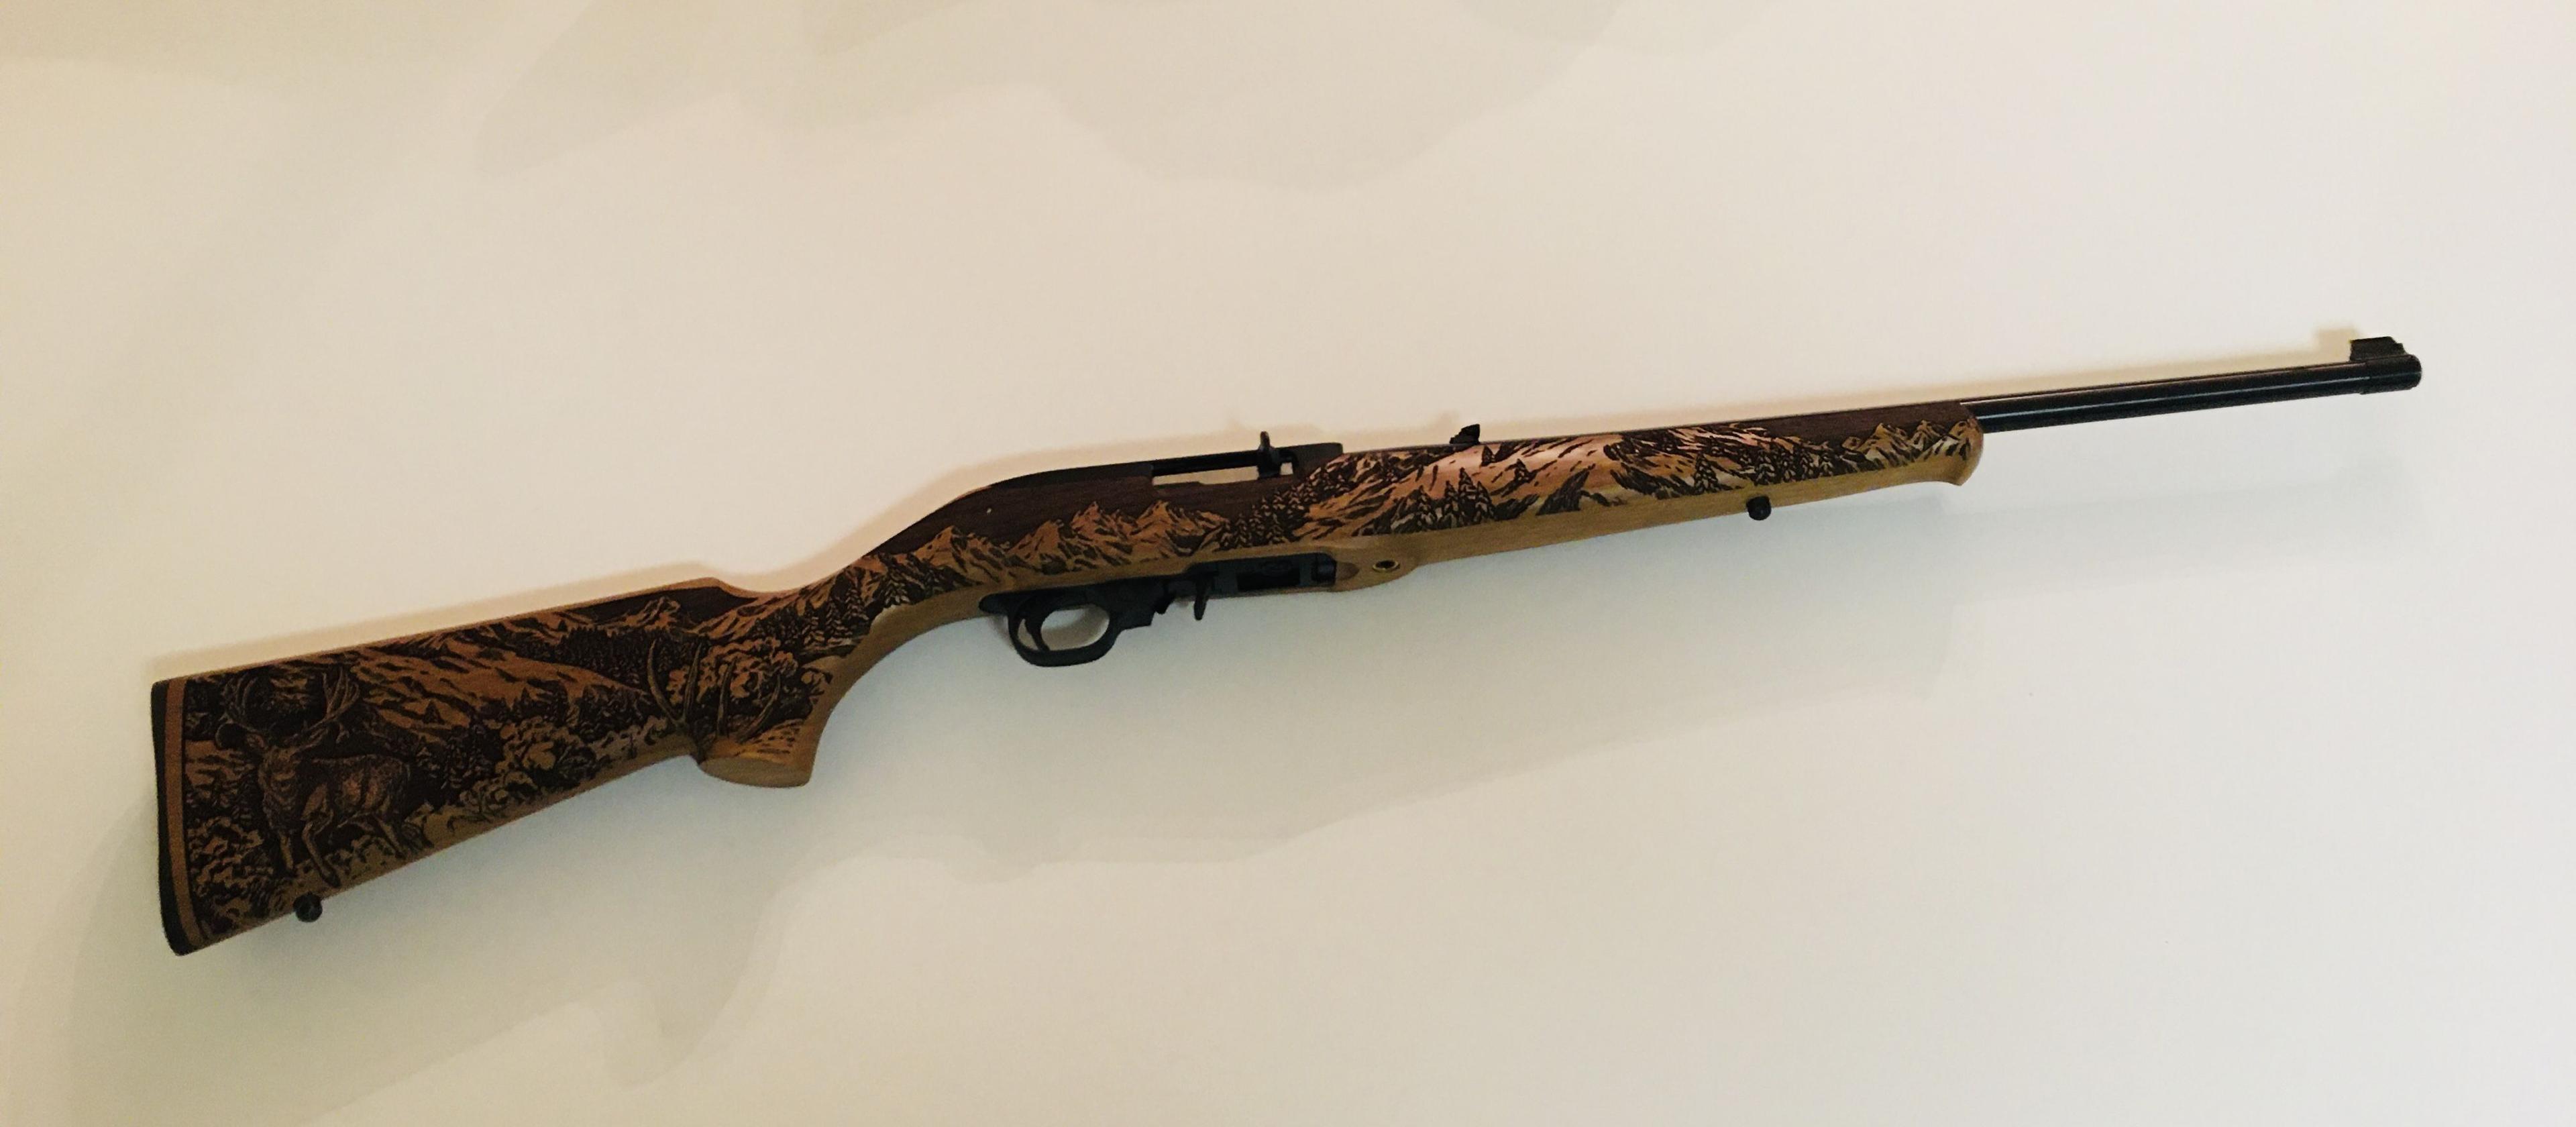 New Ruger 10/22 .22LR Rifle w/Walnut Stock Engraved